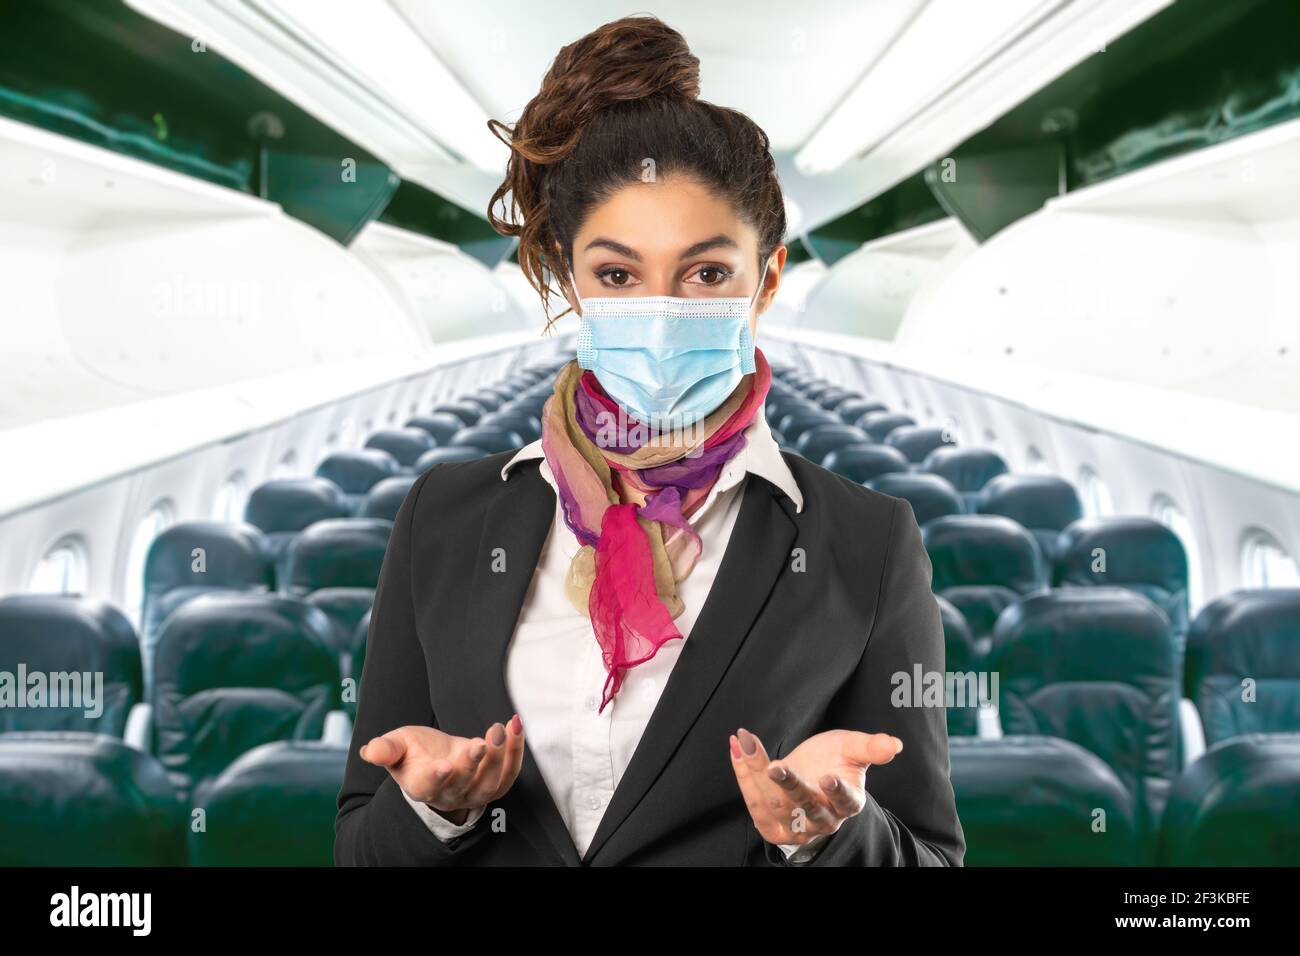 a beautiful flight attendant with surgical mask, multicolored scarf and black jacket. Subject on a blurred background. Perfect shot for women at work, Stock Photo